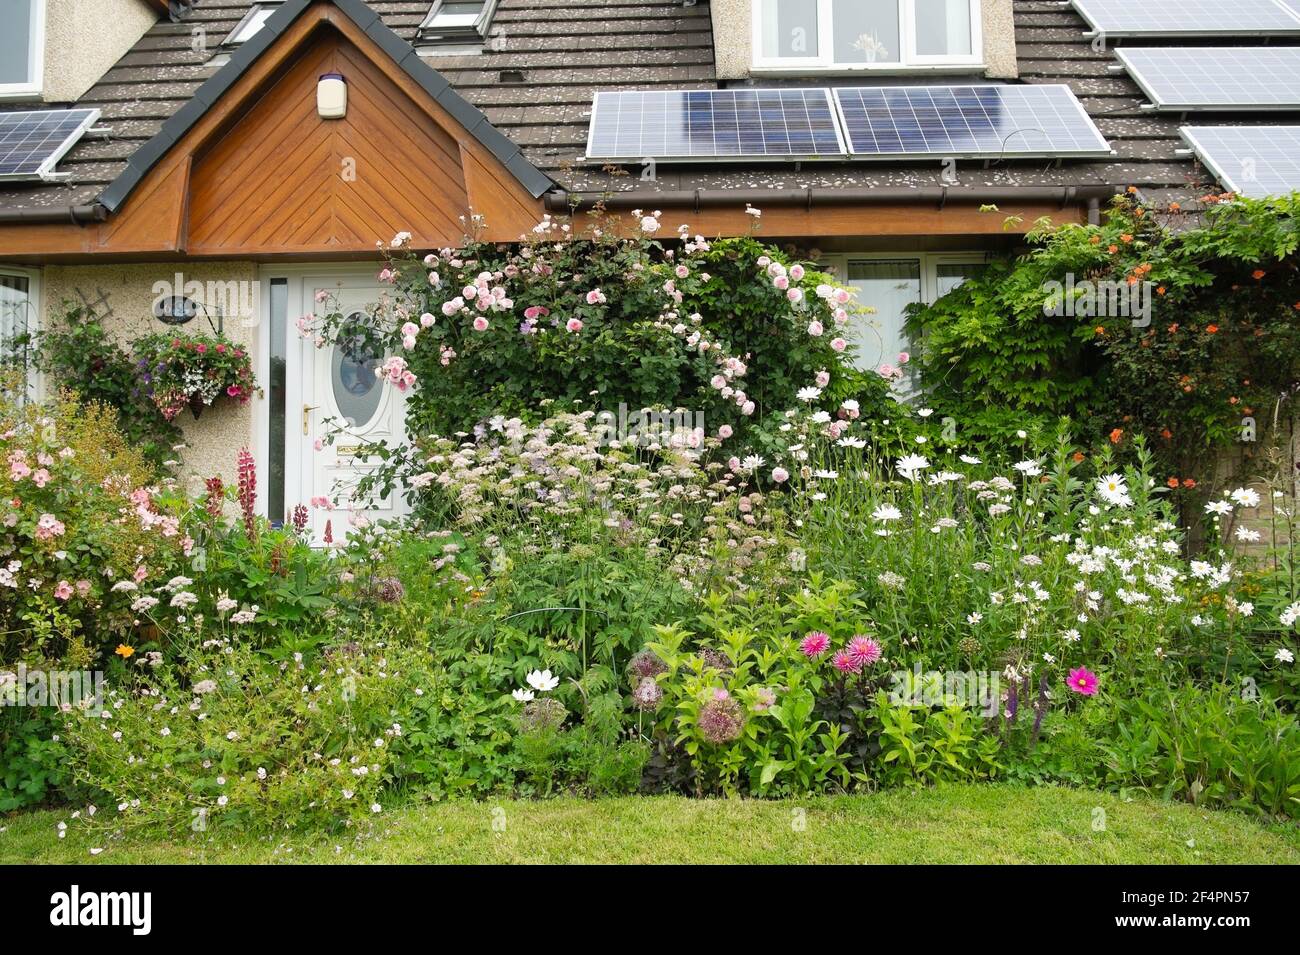 A colourful private UK residential cottage garden in Summer with overflowing borders bursting with color and solar panels on roof. Stock Photo